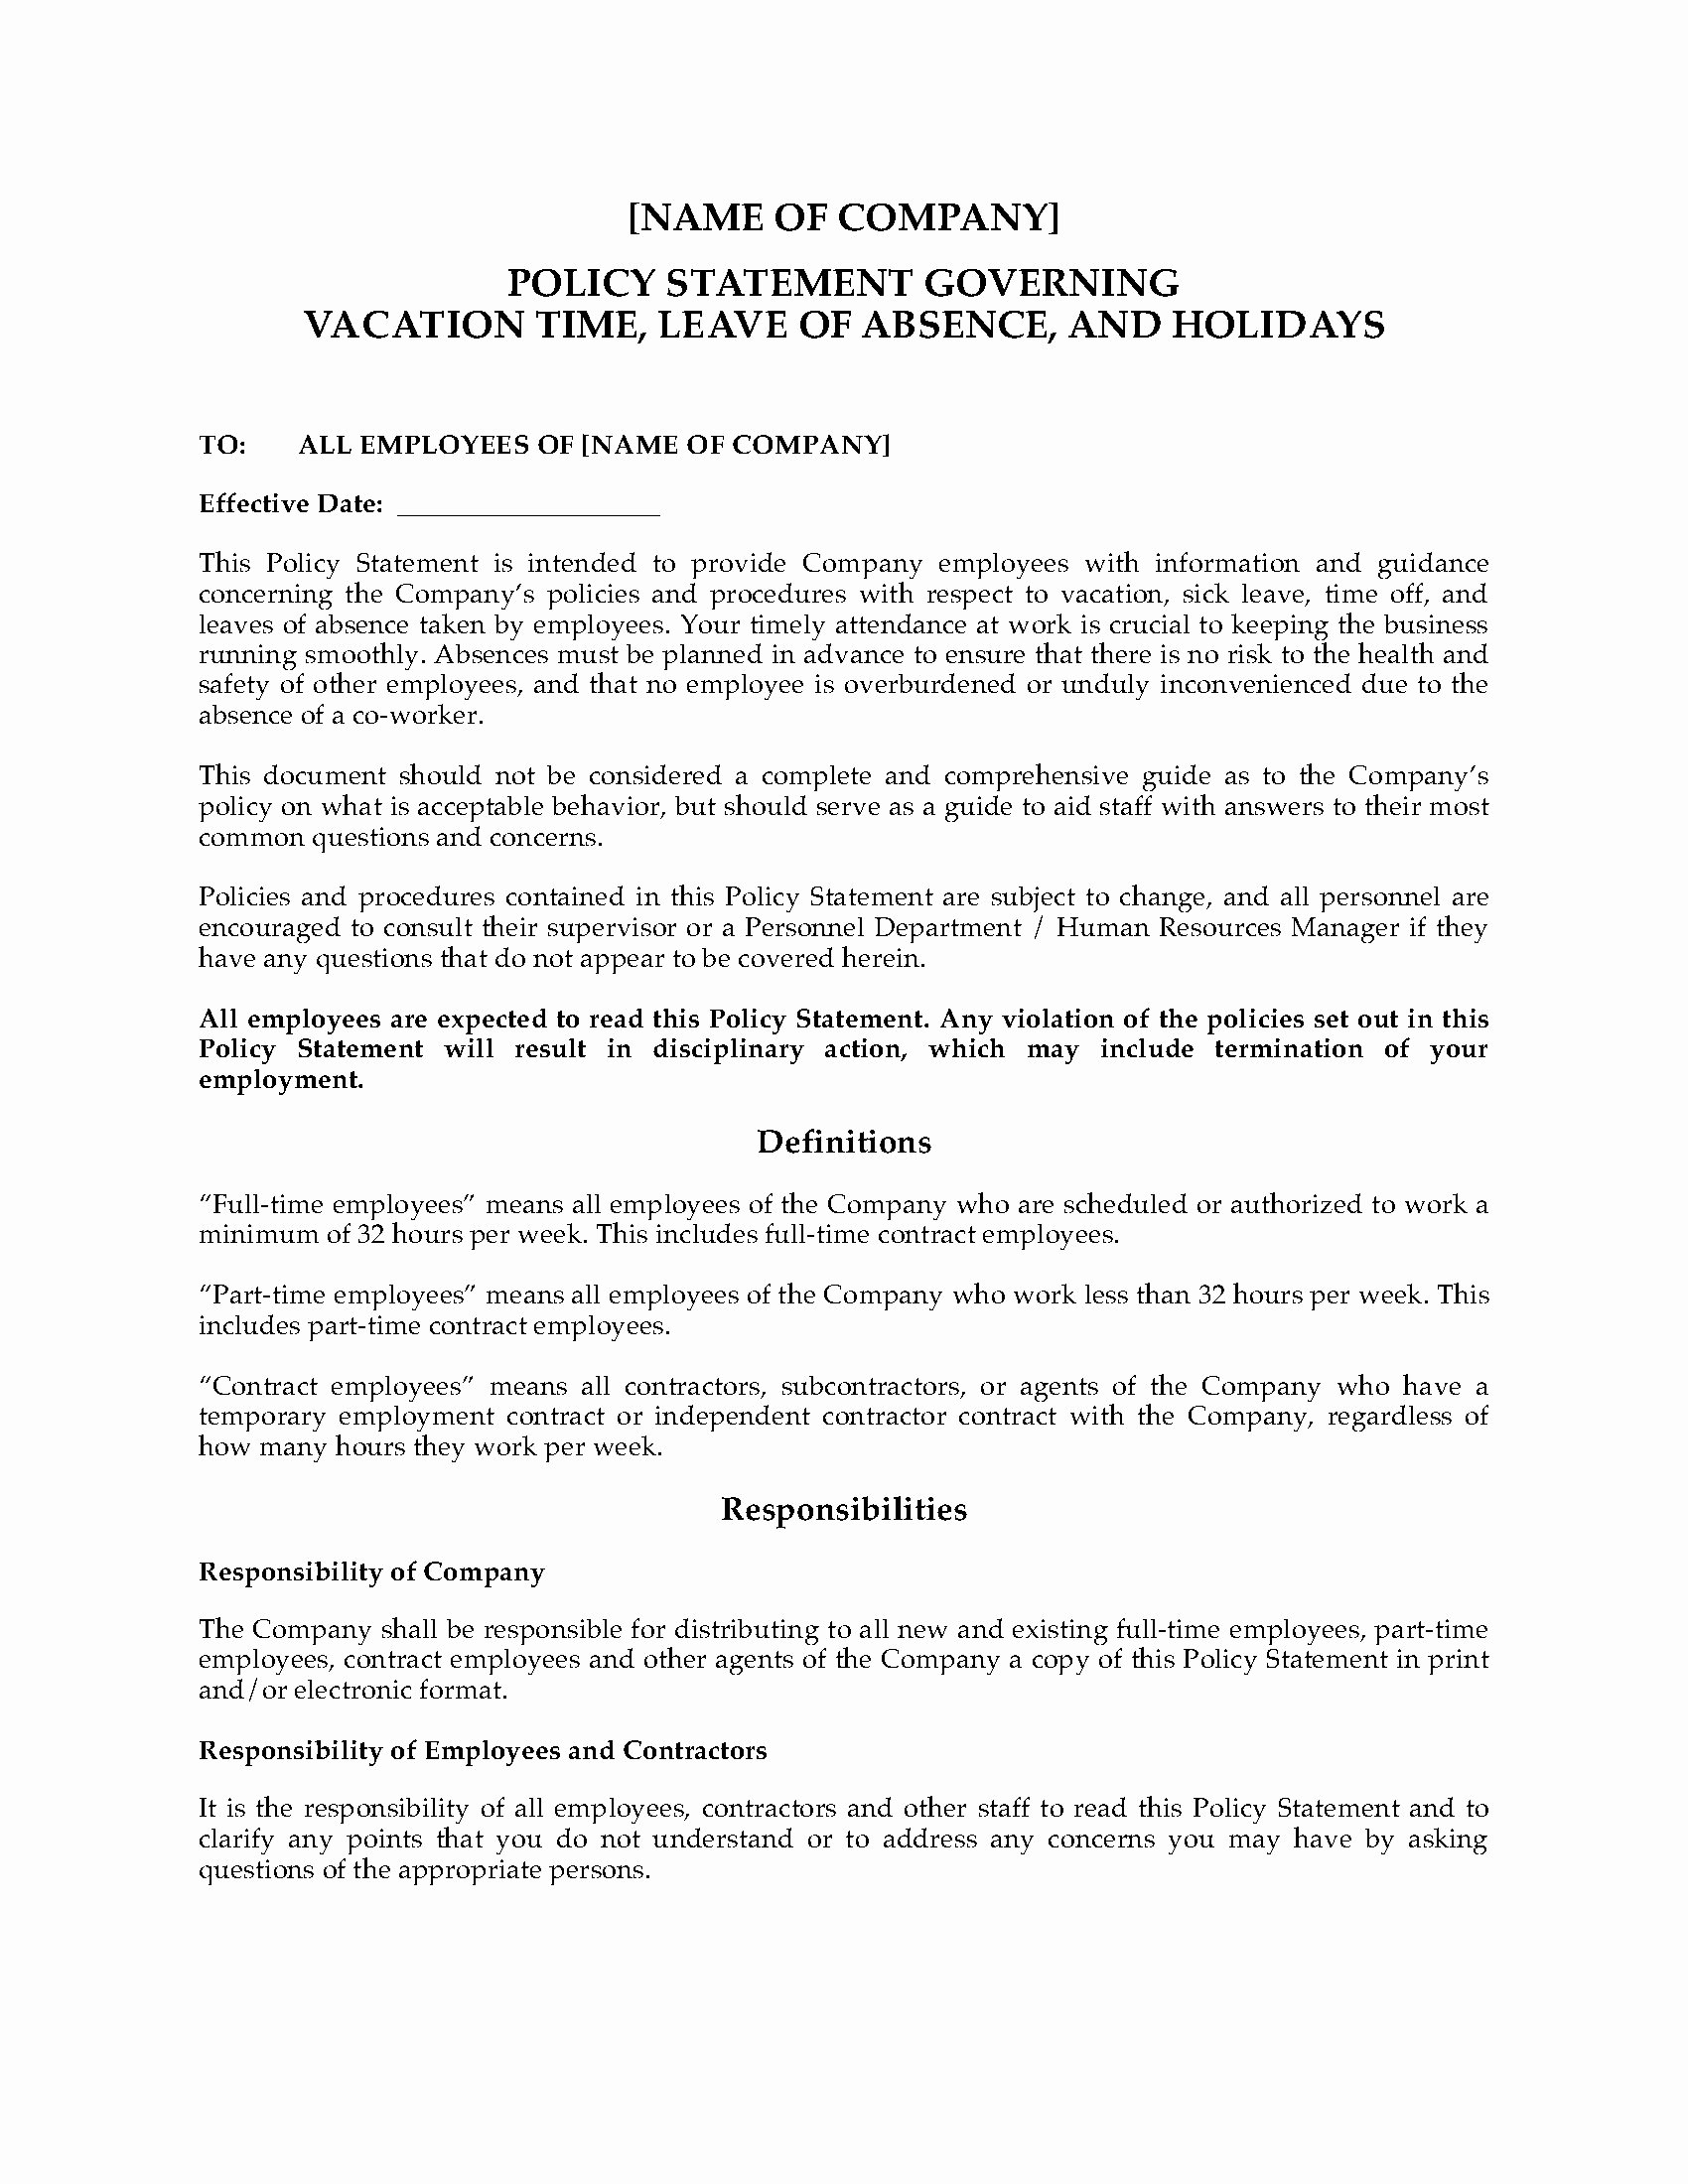 Leave Of Absence Templates Elegant Vacation Leave Of Absence and Holiday Policy Statement